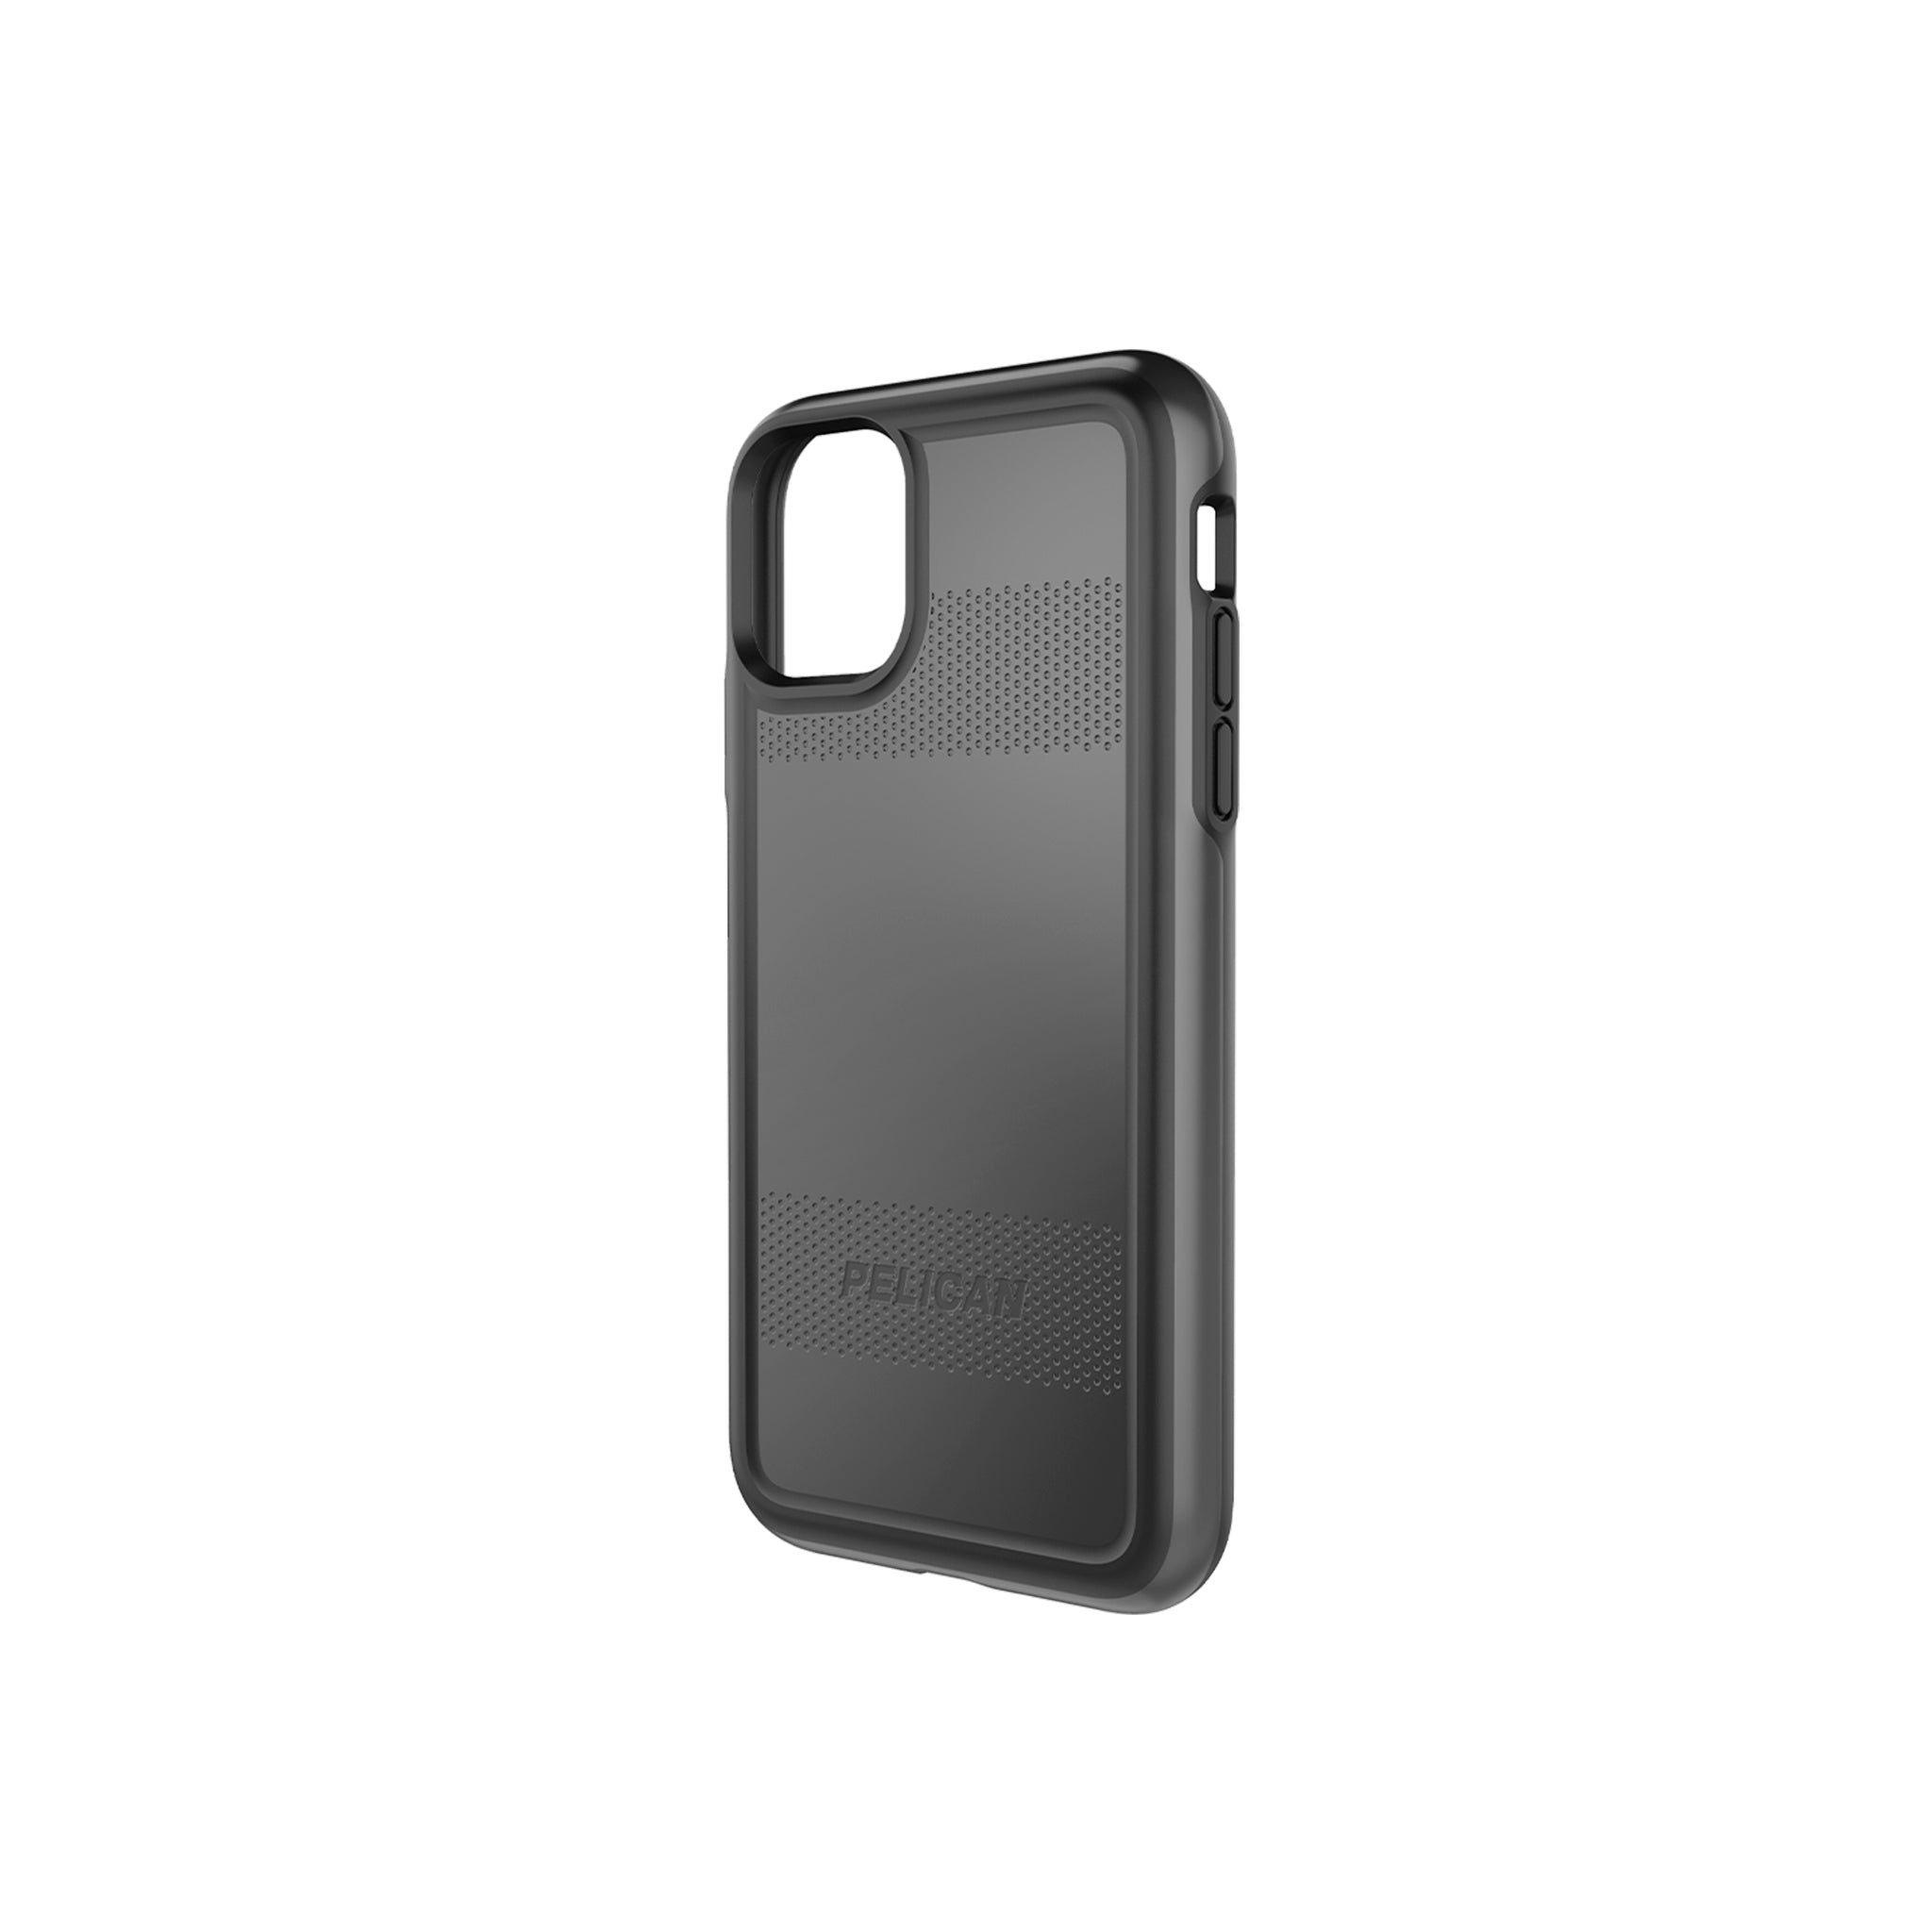 Pelican - Protector Case For Apple iPhone 11 / Xr - Black